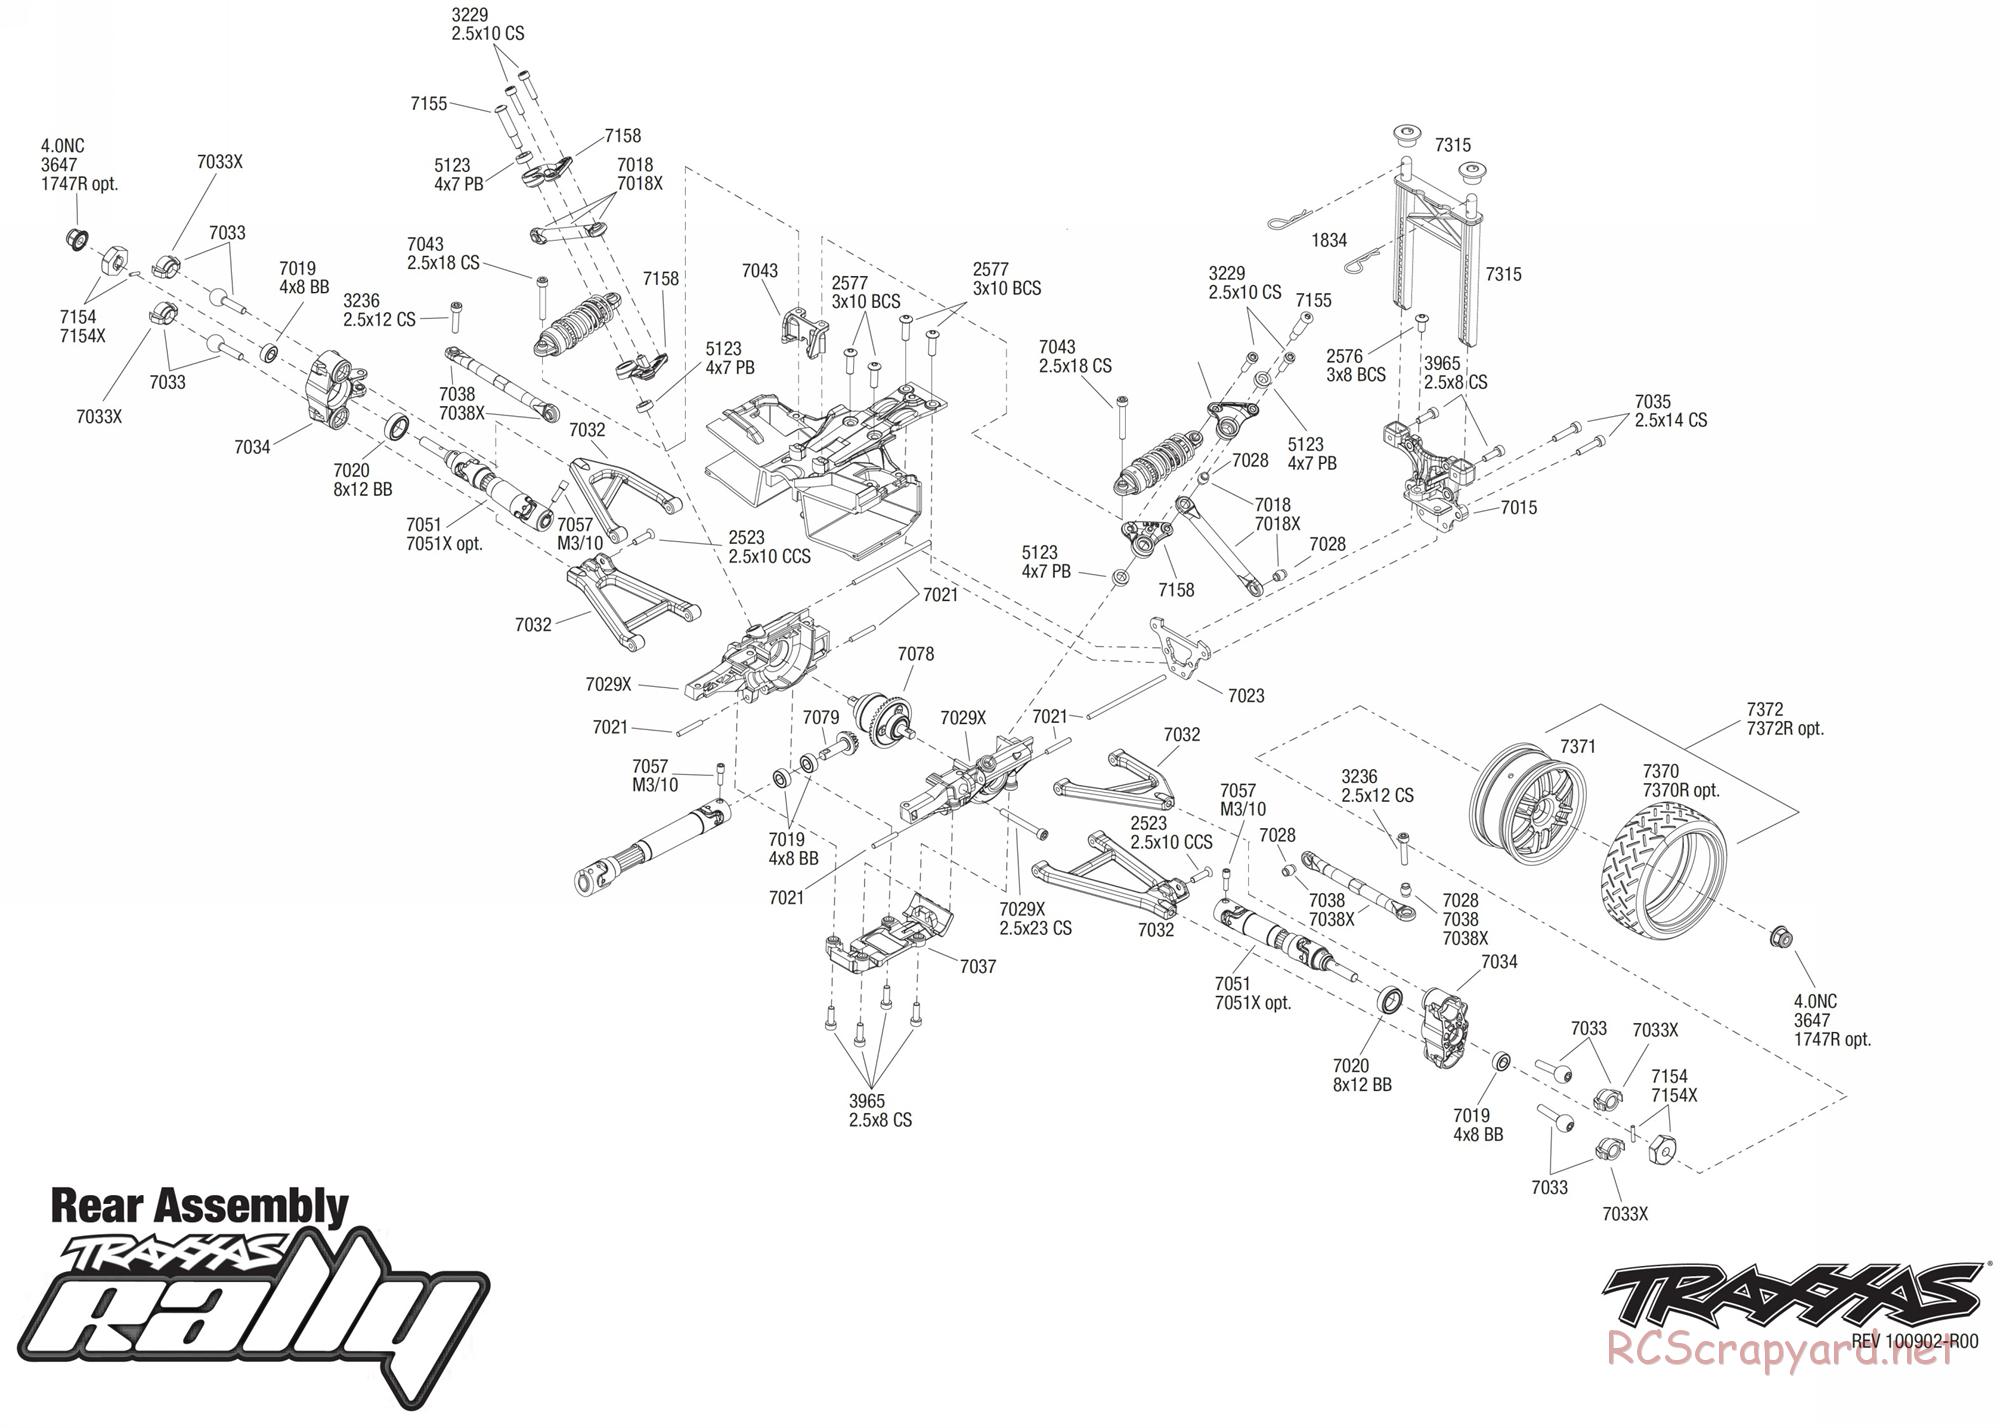 Traxxas - 1/16 Rally VXL (2010) - Exploded Views - Page 4